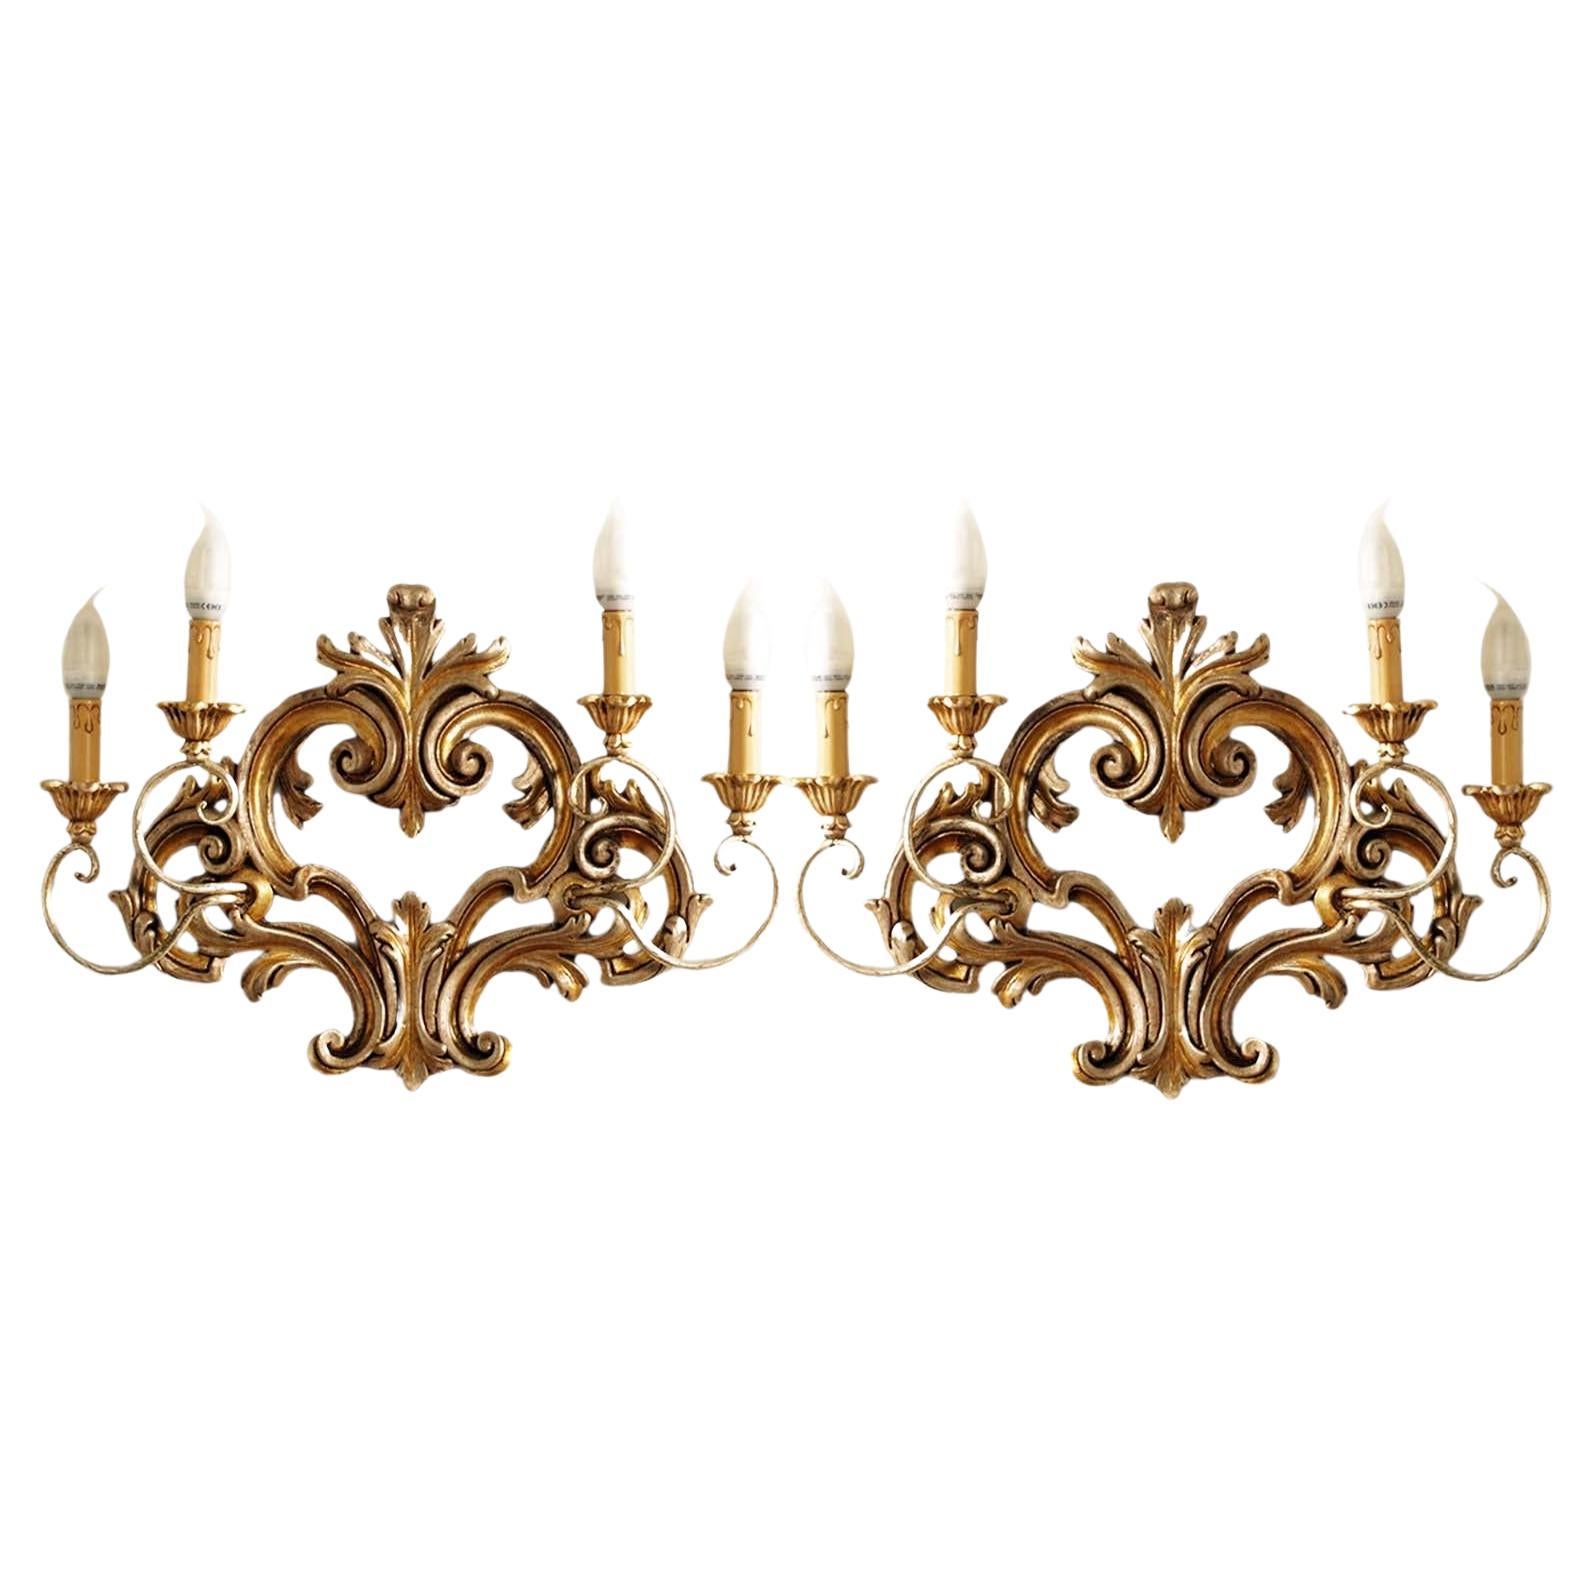 Pair of Carved and Gilded Wood Ornamental Sconces Testolini Freres Venetian work For Sale